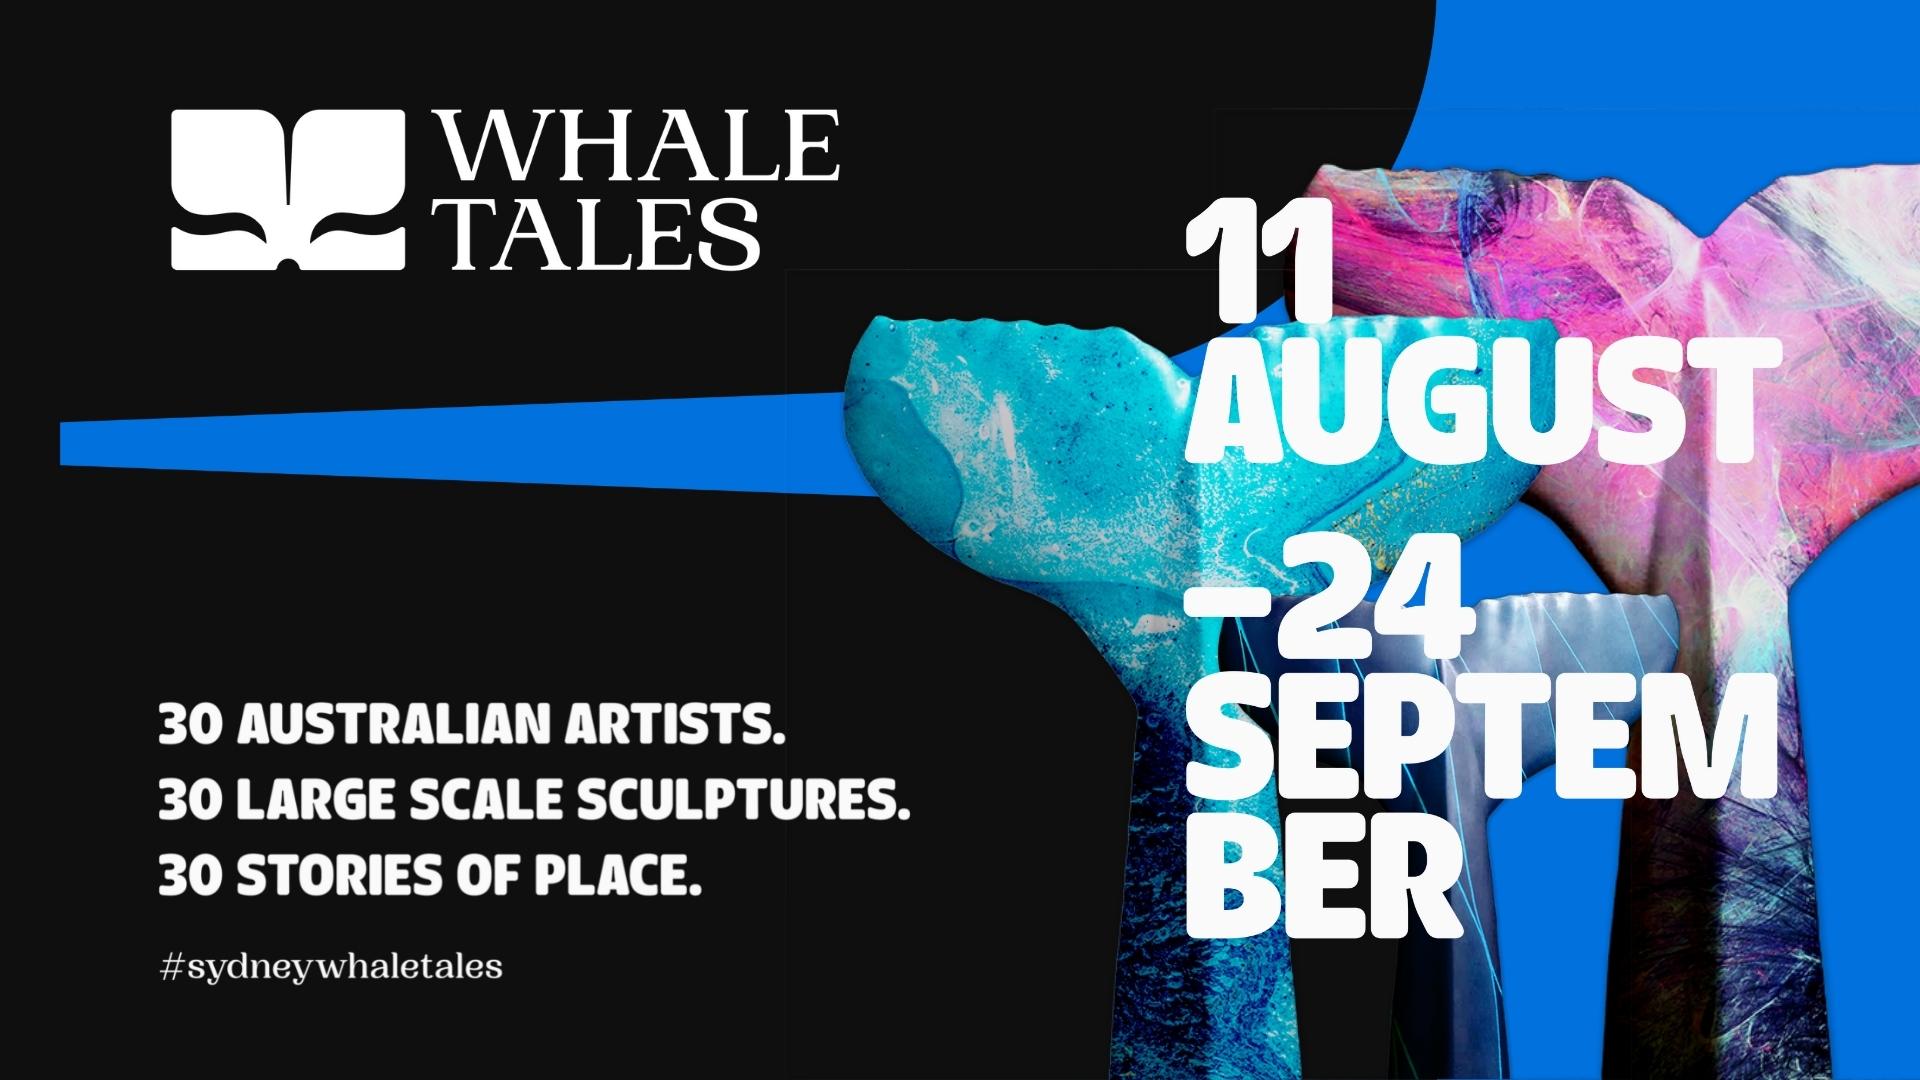 Waterfront Whale Tales, Sydney, New South Wales, Australia